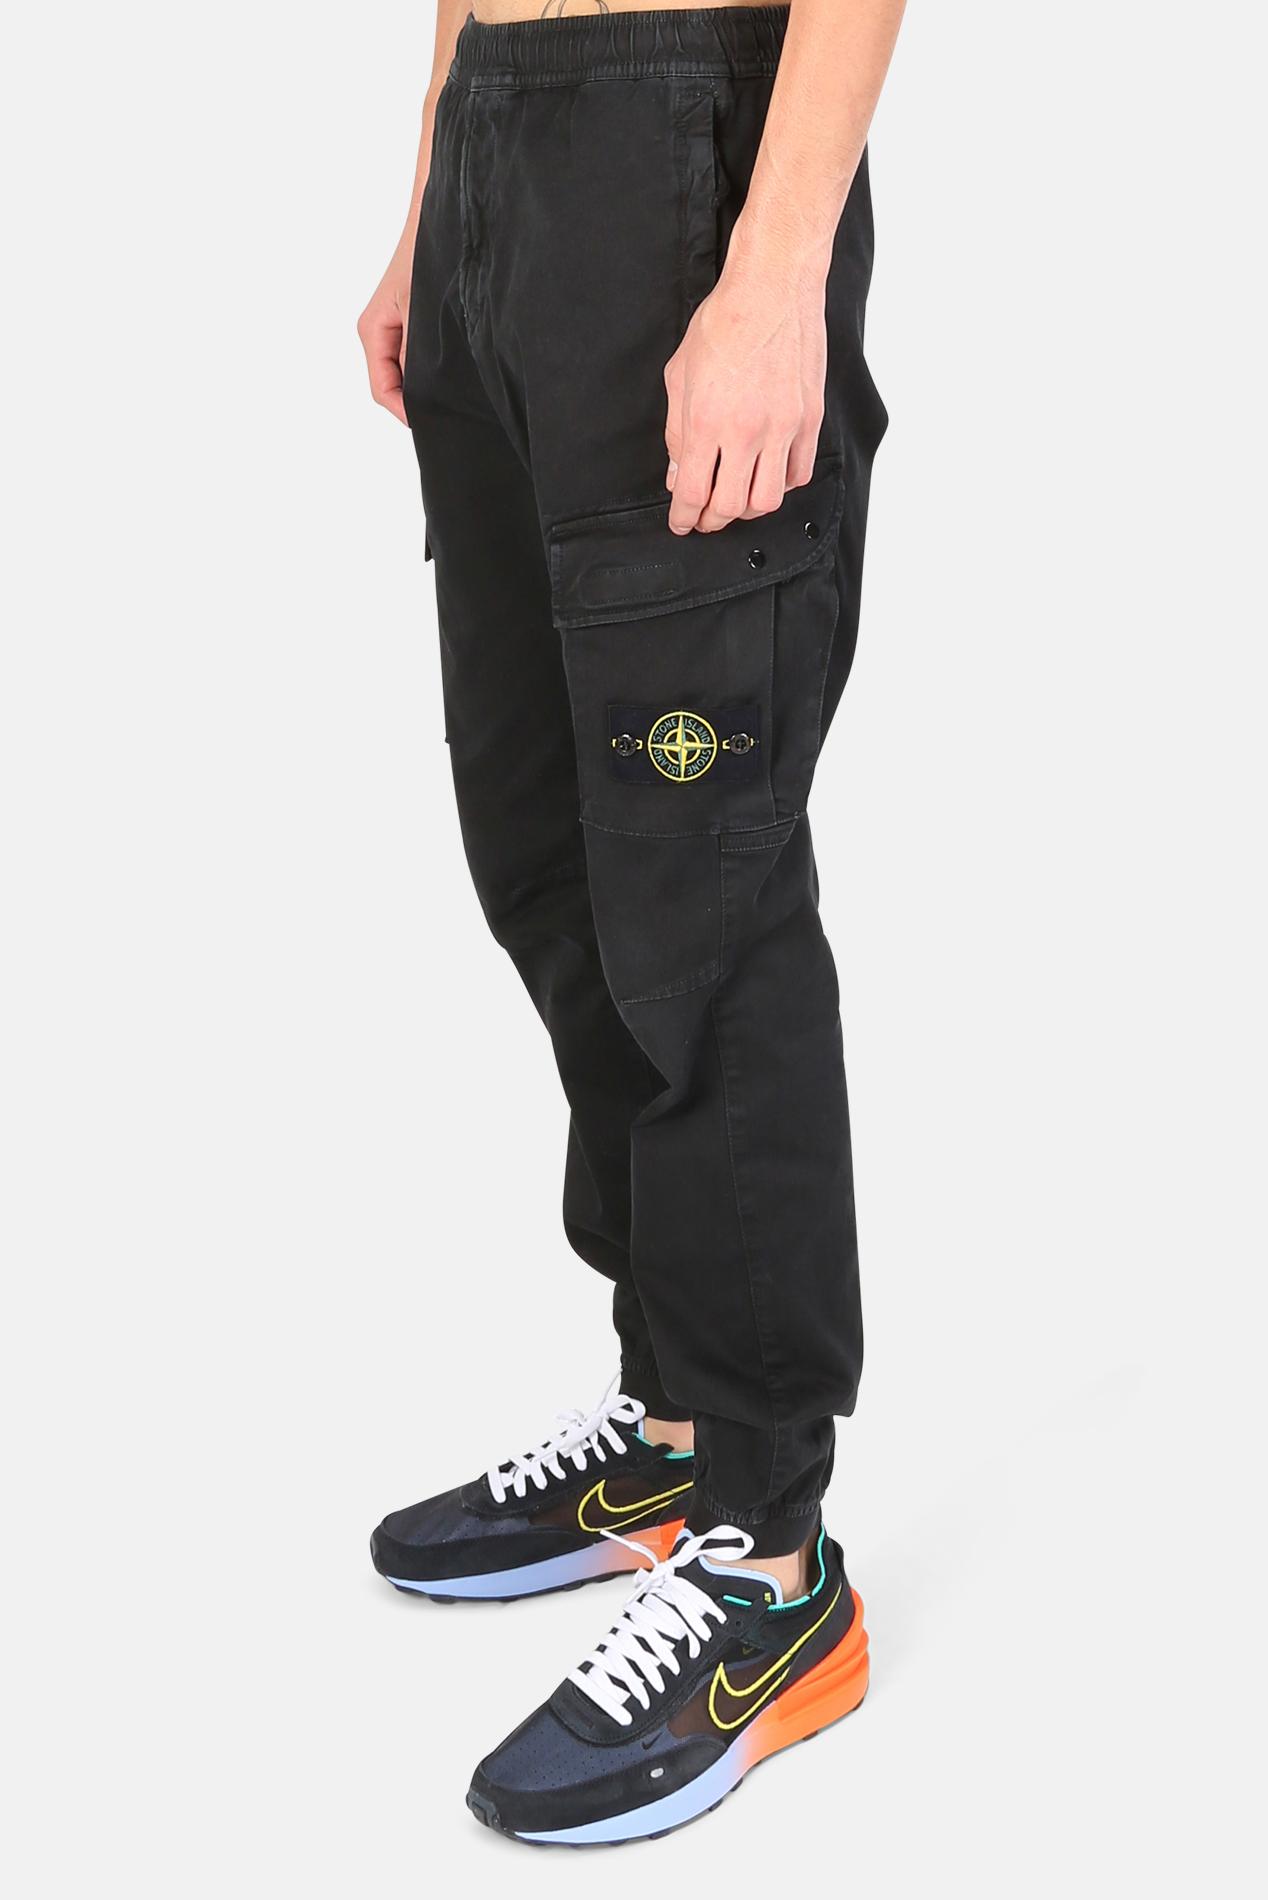 Stone Island Cotton Cargo Trousers in Black for Men | Lyst